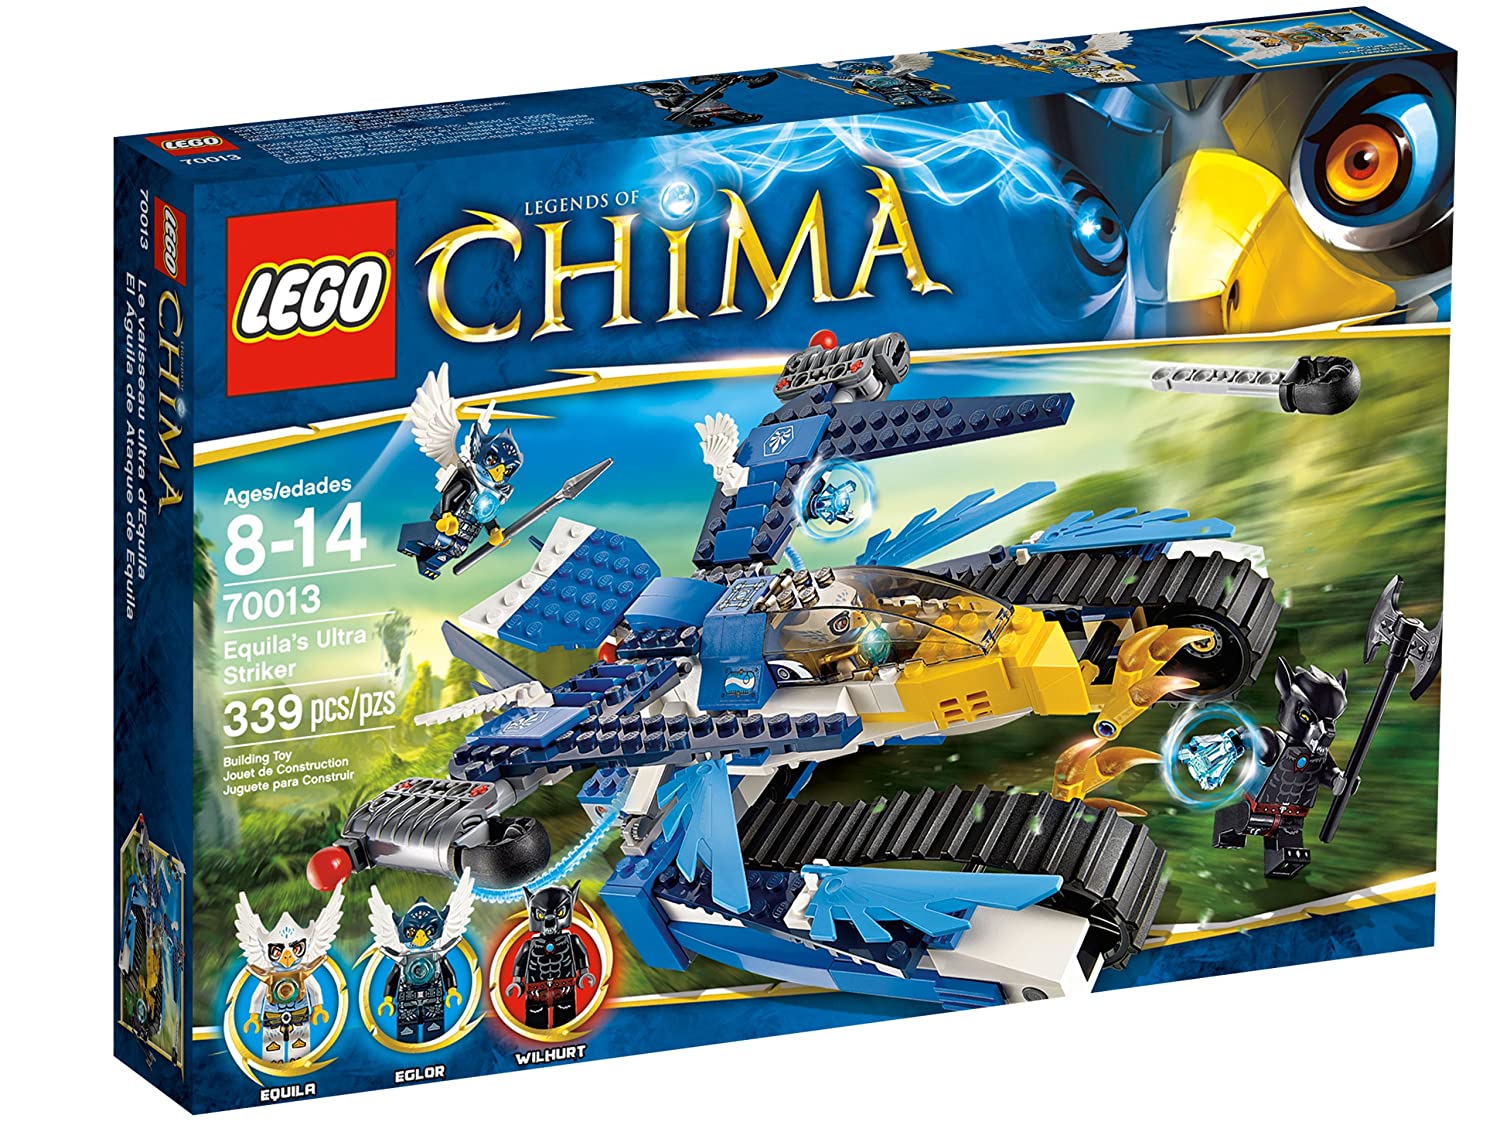 9 Best LEGO Chima Sets 2022 - Buying Guide & Reviews 3